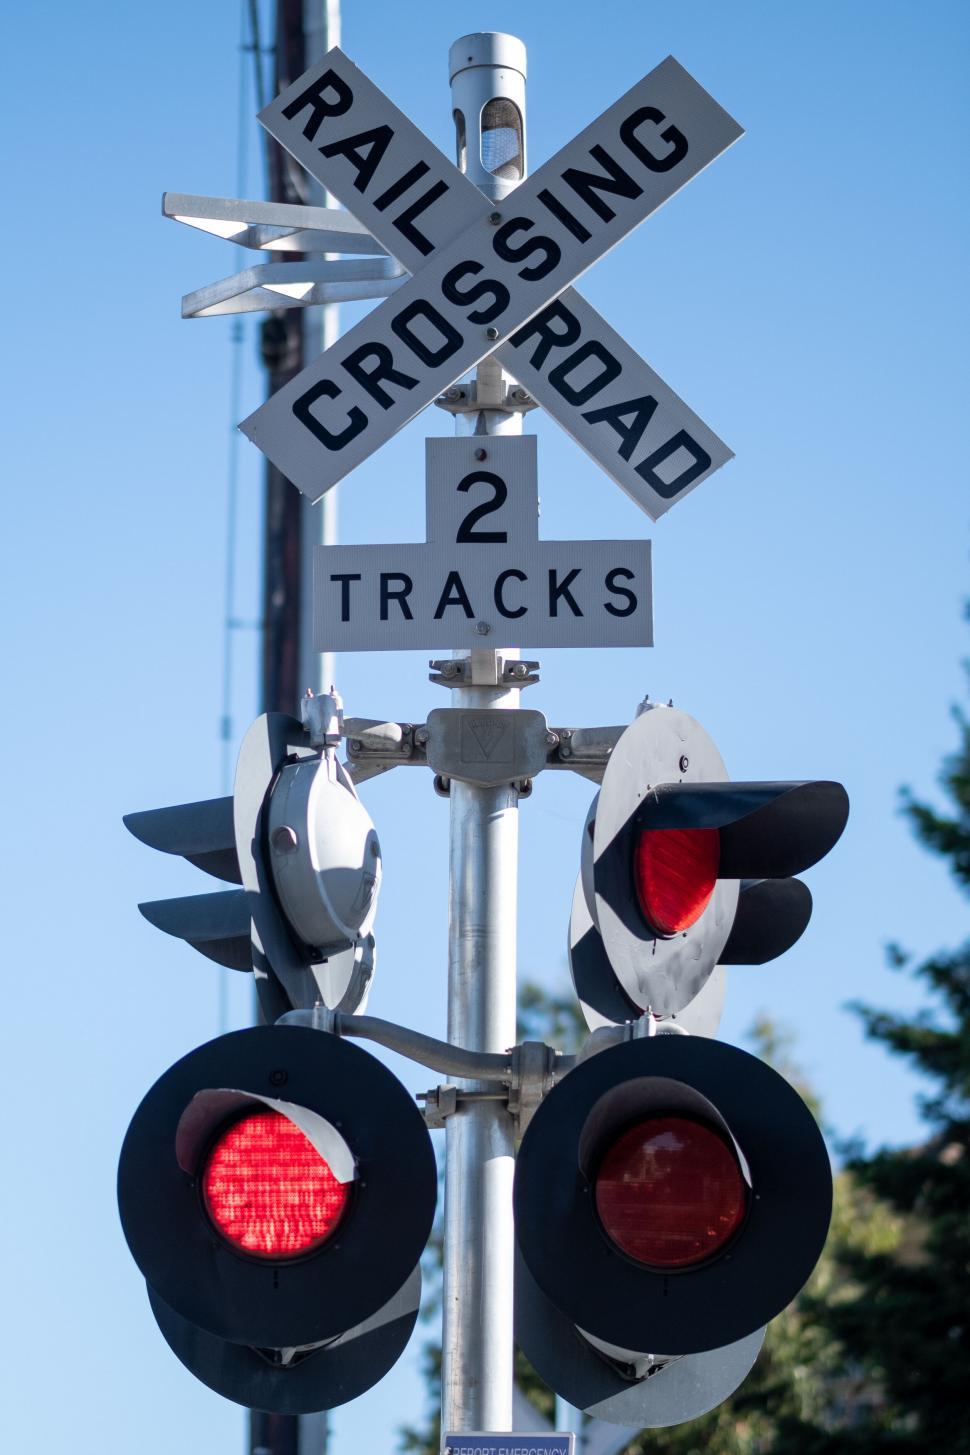 Free Image of Railroad crossing signal stopped train 